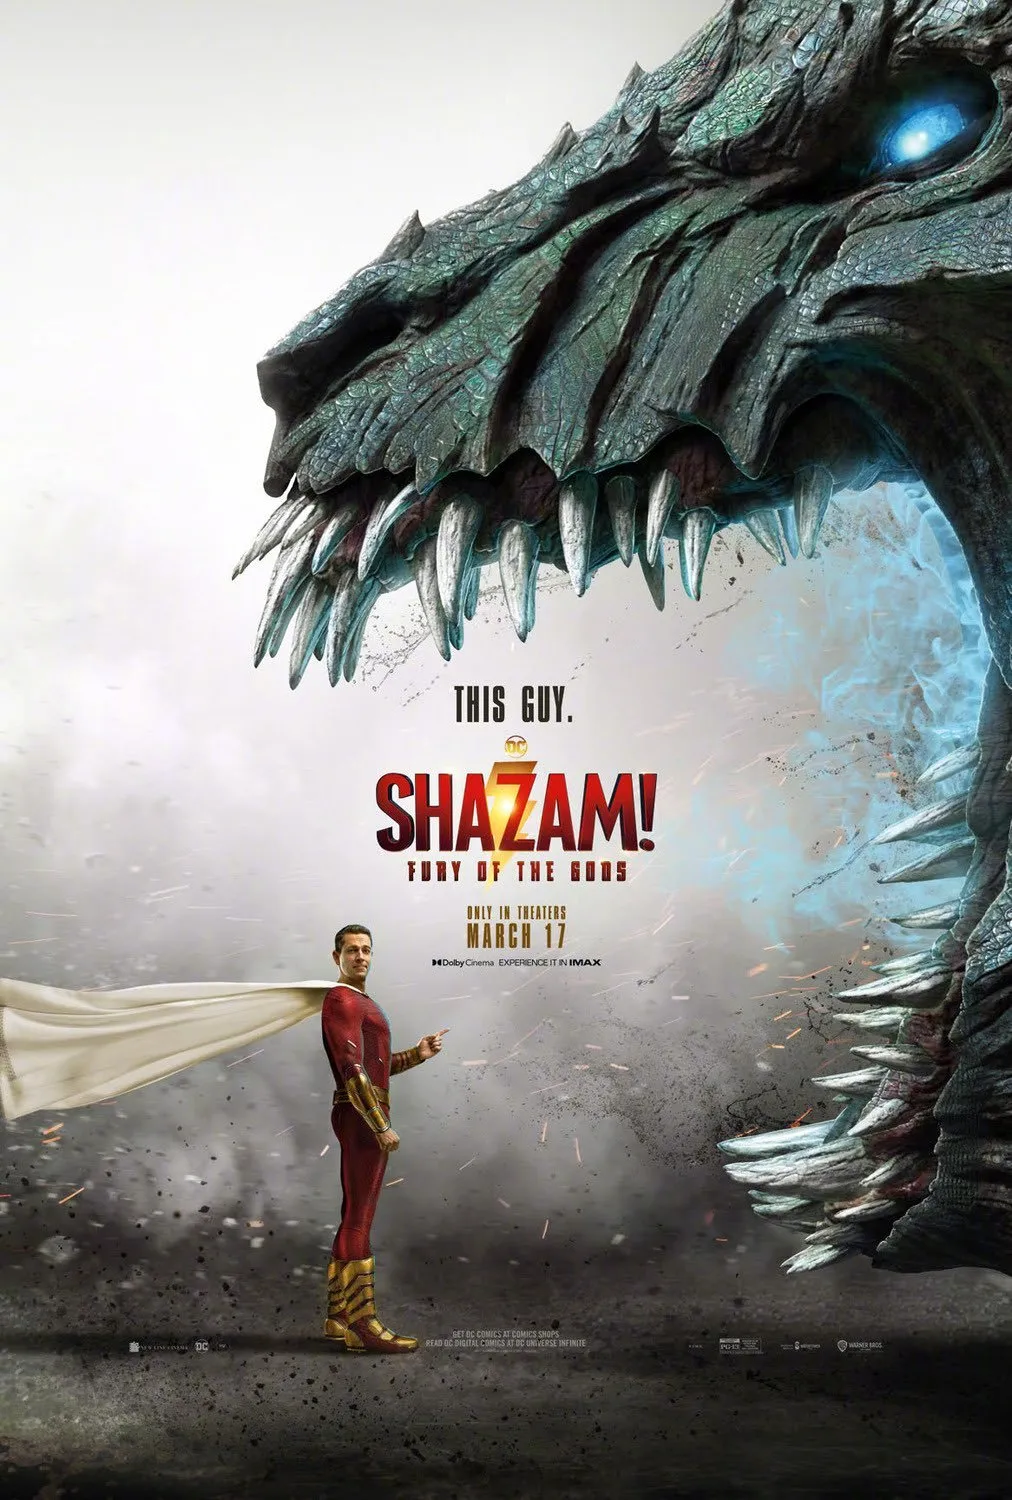 New DC superhero movie 'Shazam! Fury of the Gods' releases IMAX, Dolby posters | FMV6